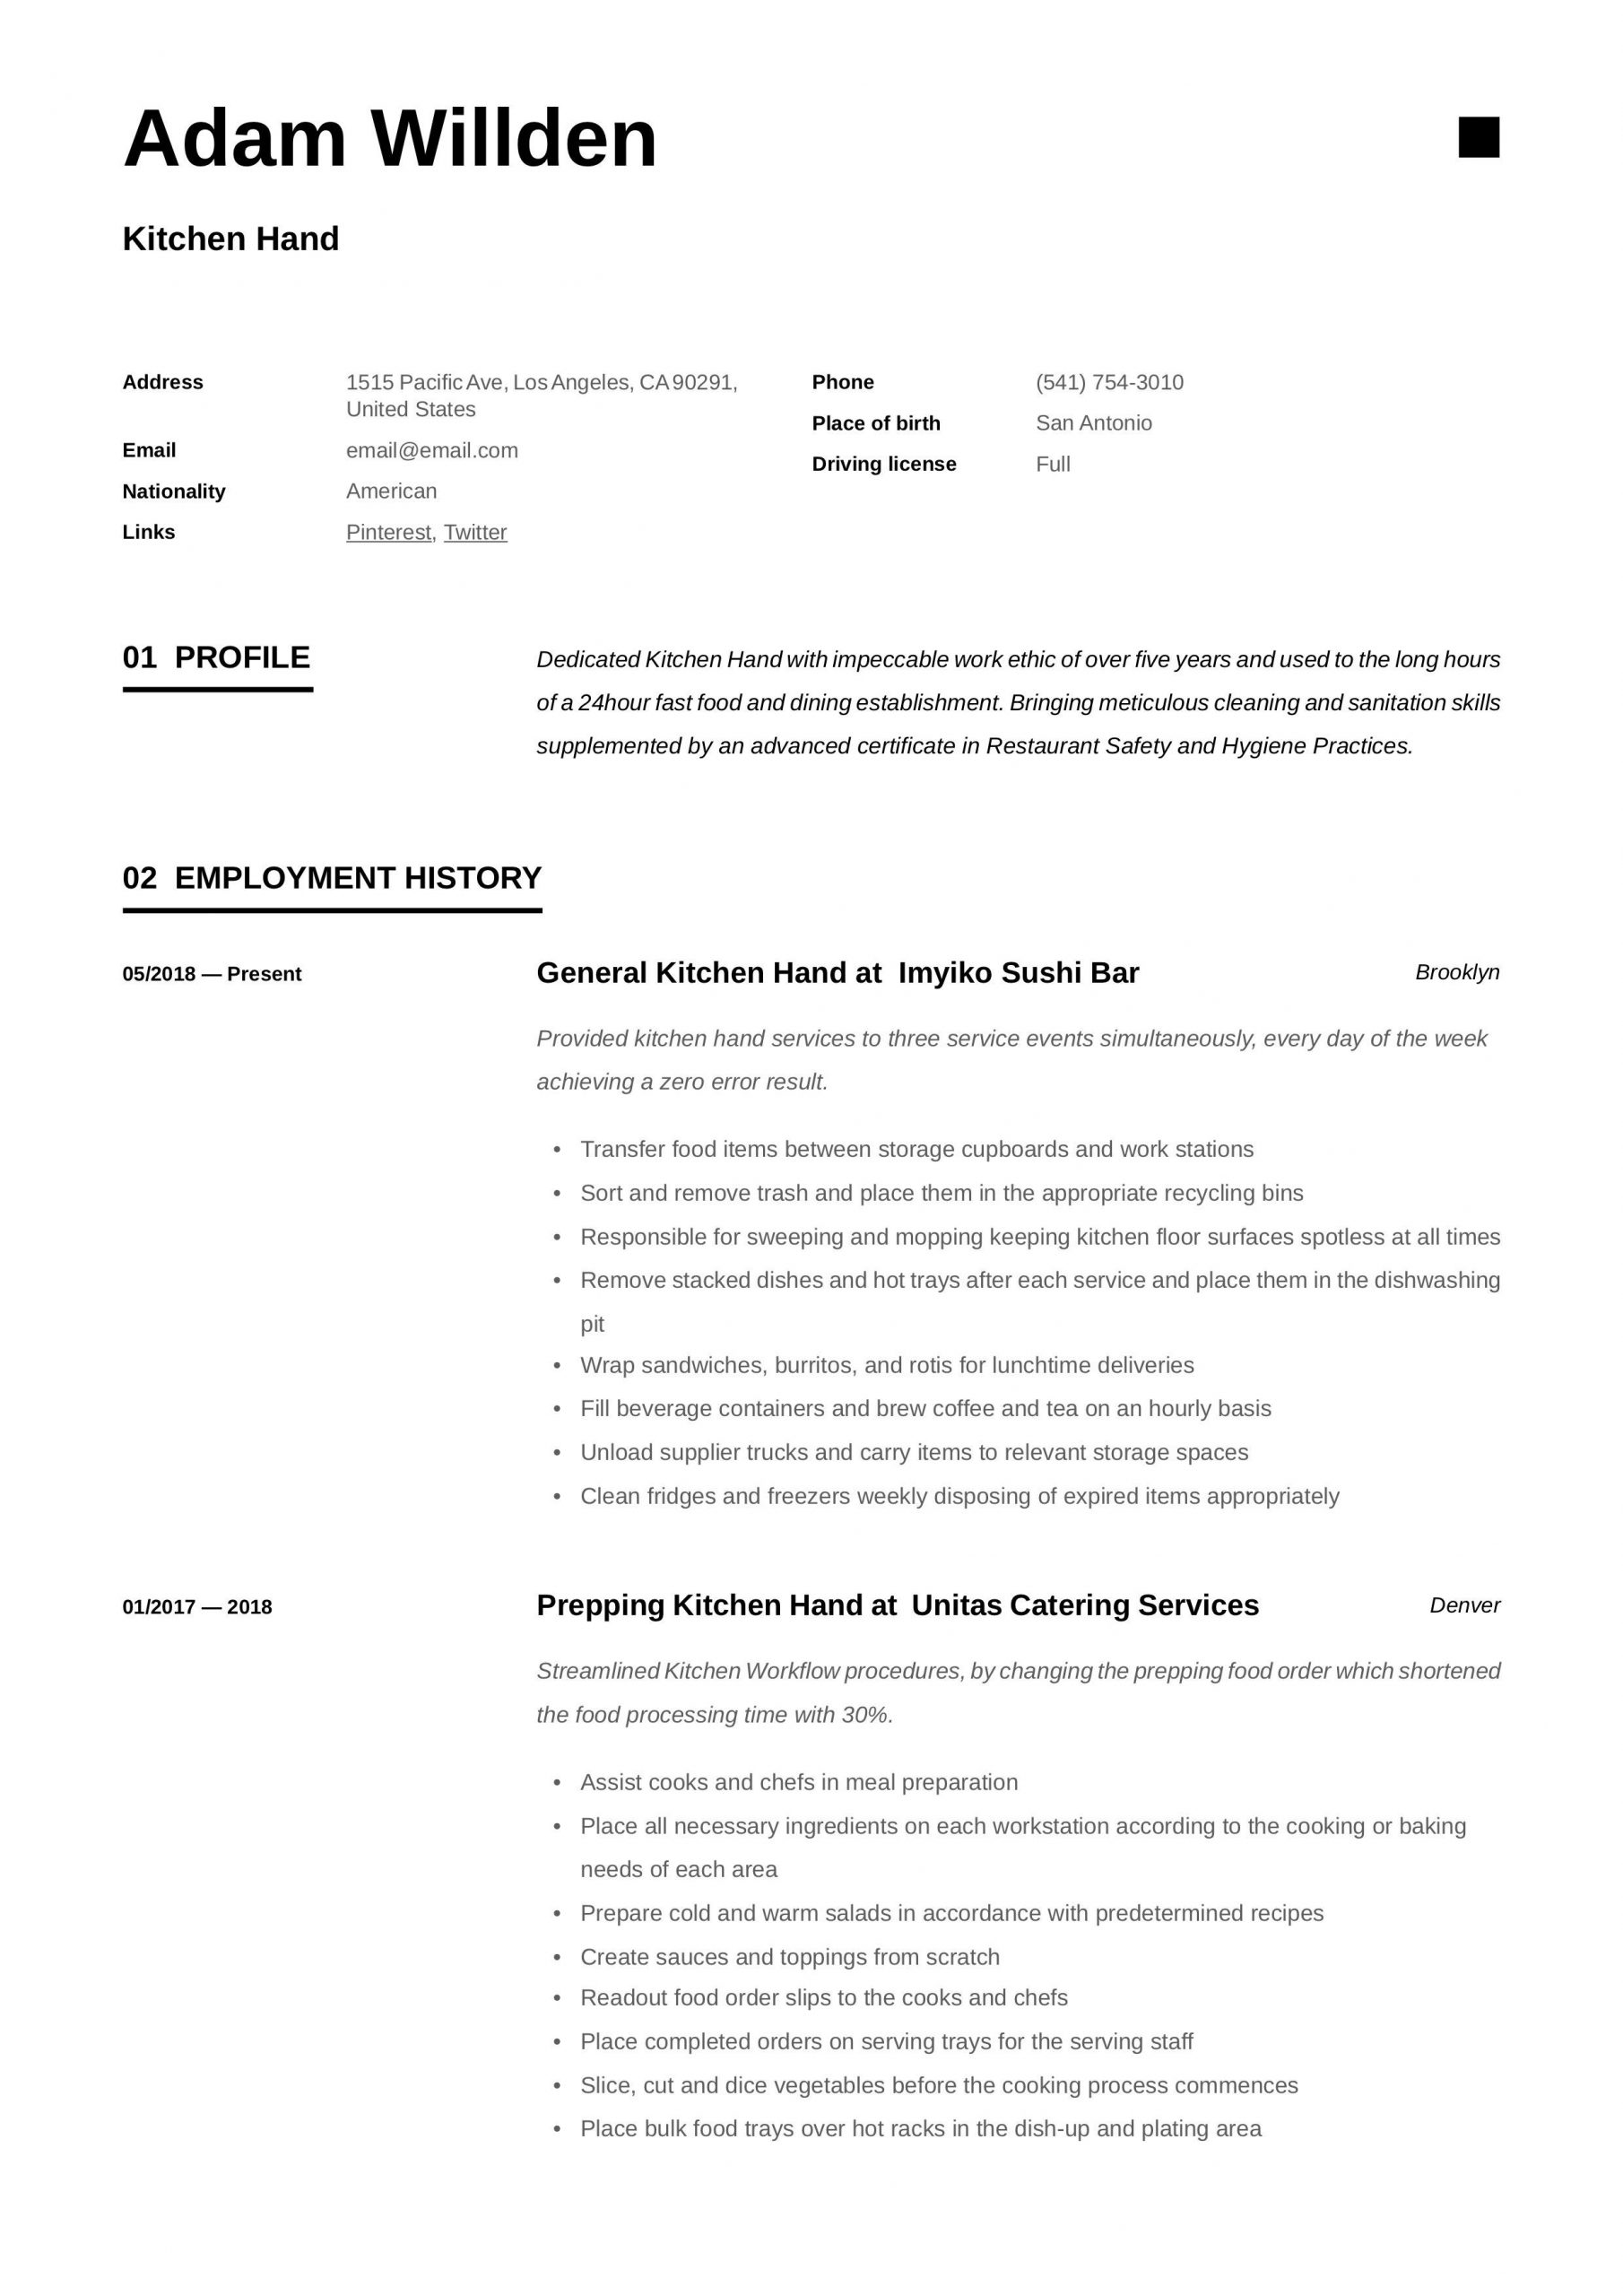 Sample Resume for Restaurant Kitchen Hand Kitchen Hand Resume Template Guided Writing, Resume, Resume Template